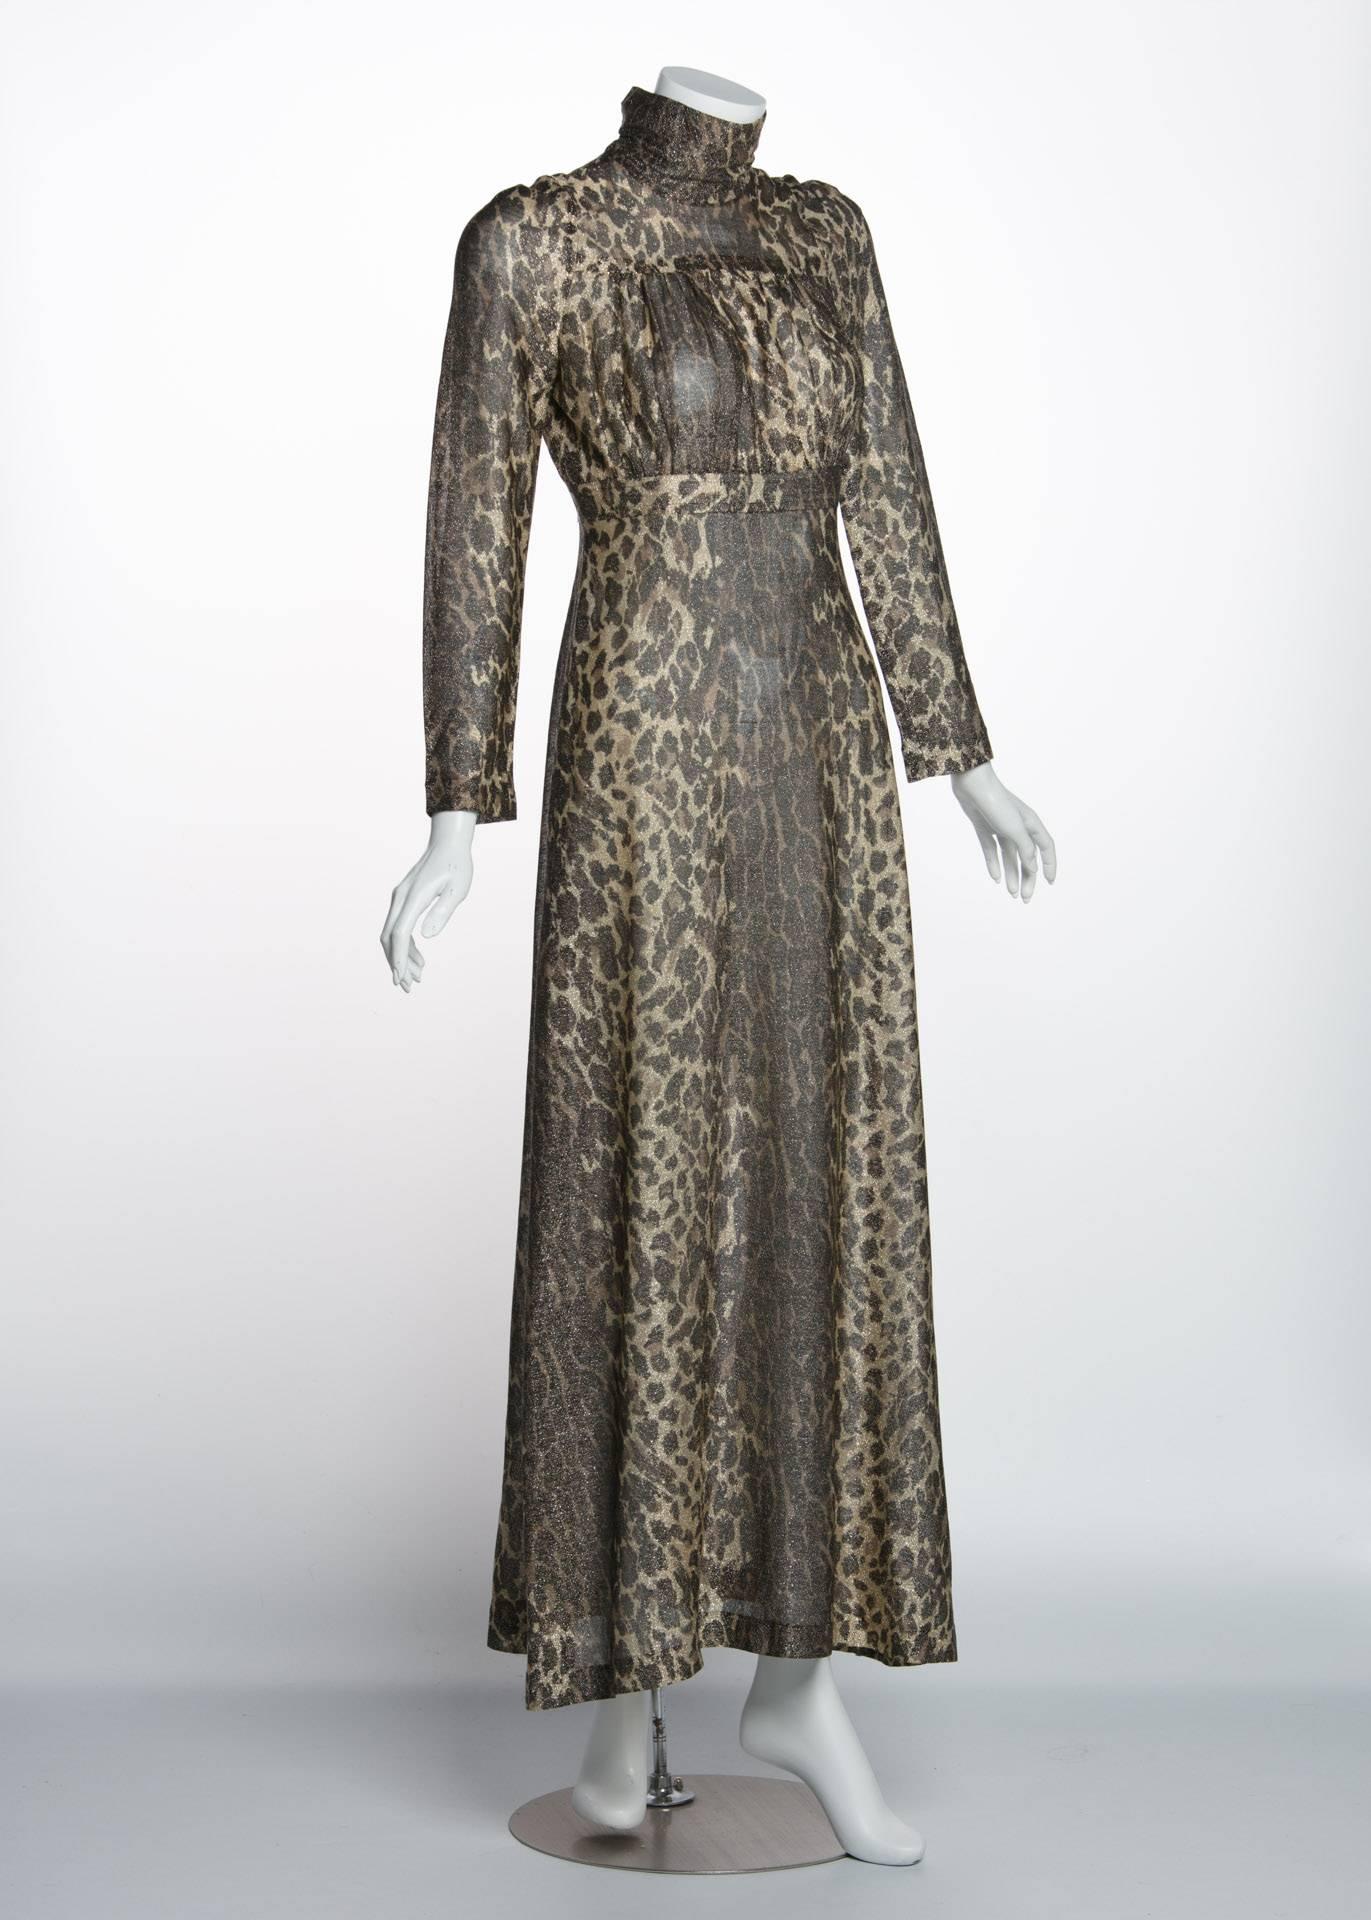 British designer Janice Wainwright had a way with fabrics. She thoroughly involved herself in developing textile designs for her clothing, leading to creations that held a striking balance between cut, drape, and pattern. This gown was designed